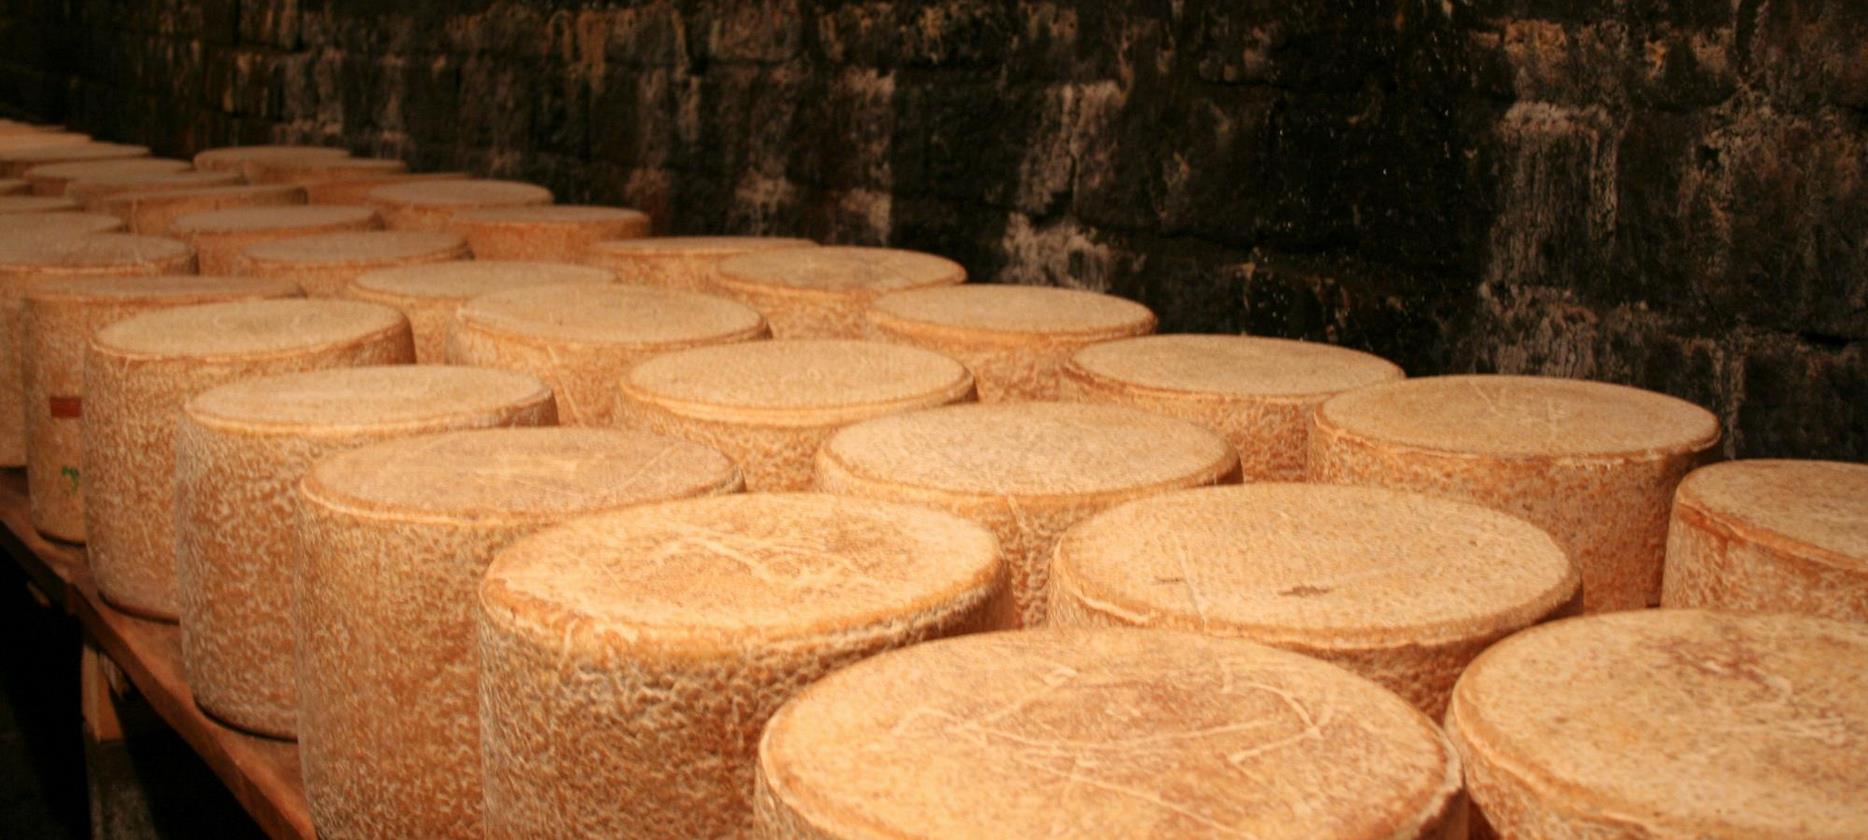 AOP Auvergne cheese - Cantal ripening cellar